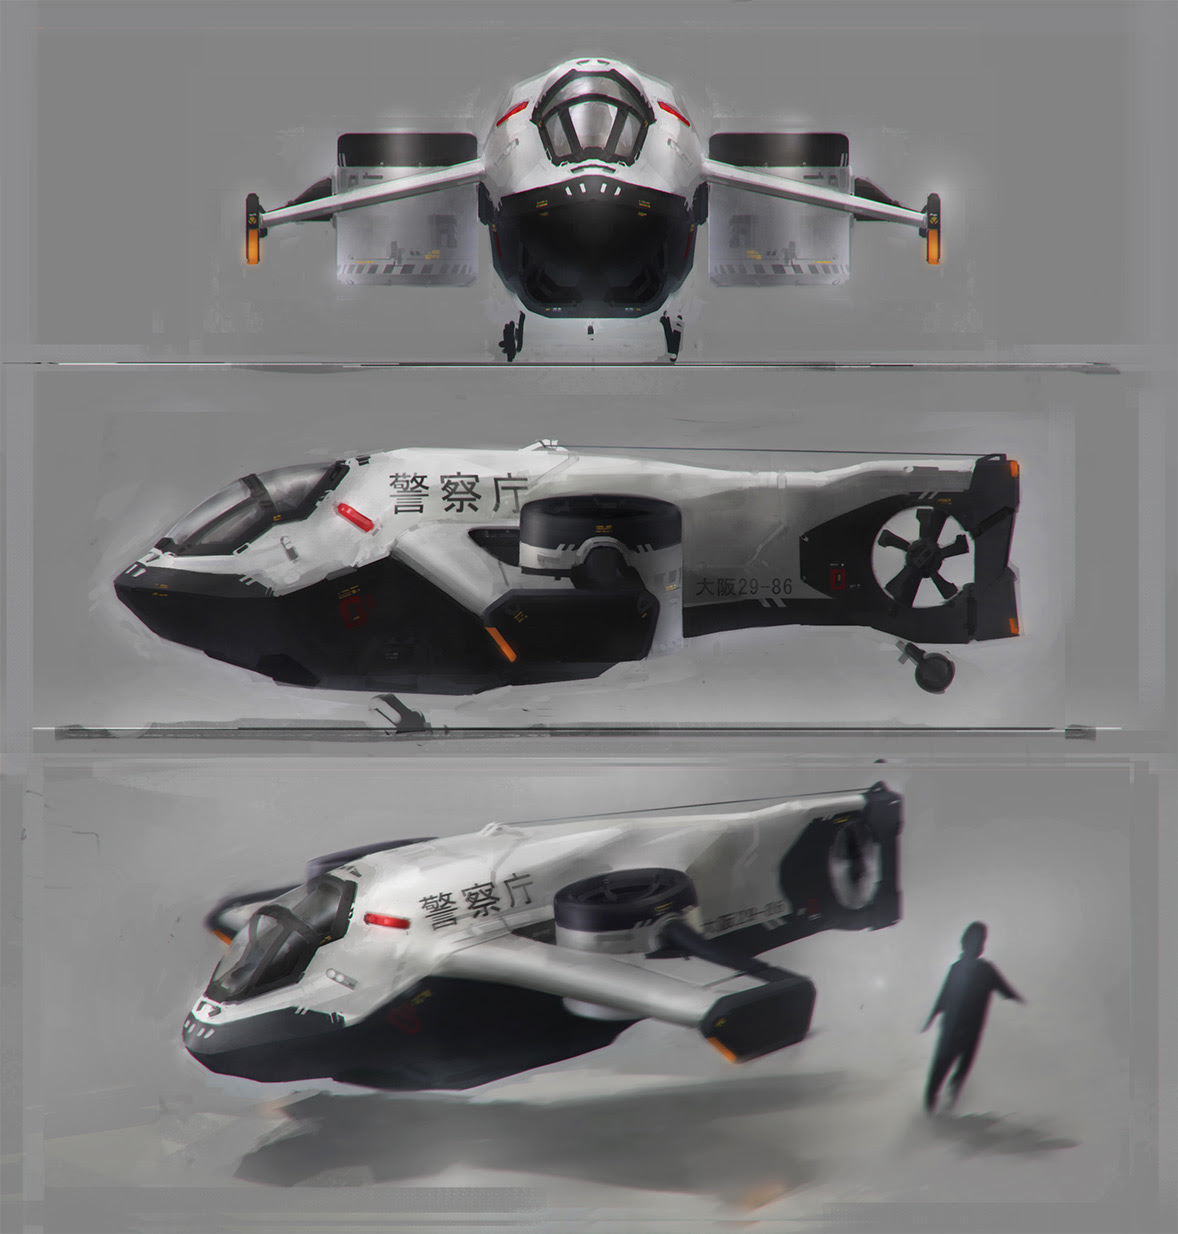 concept ships: Concept spaceship art by Long Ouyang